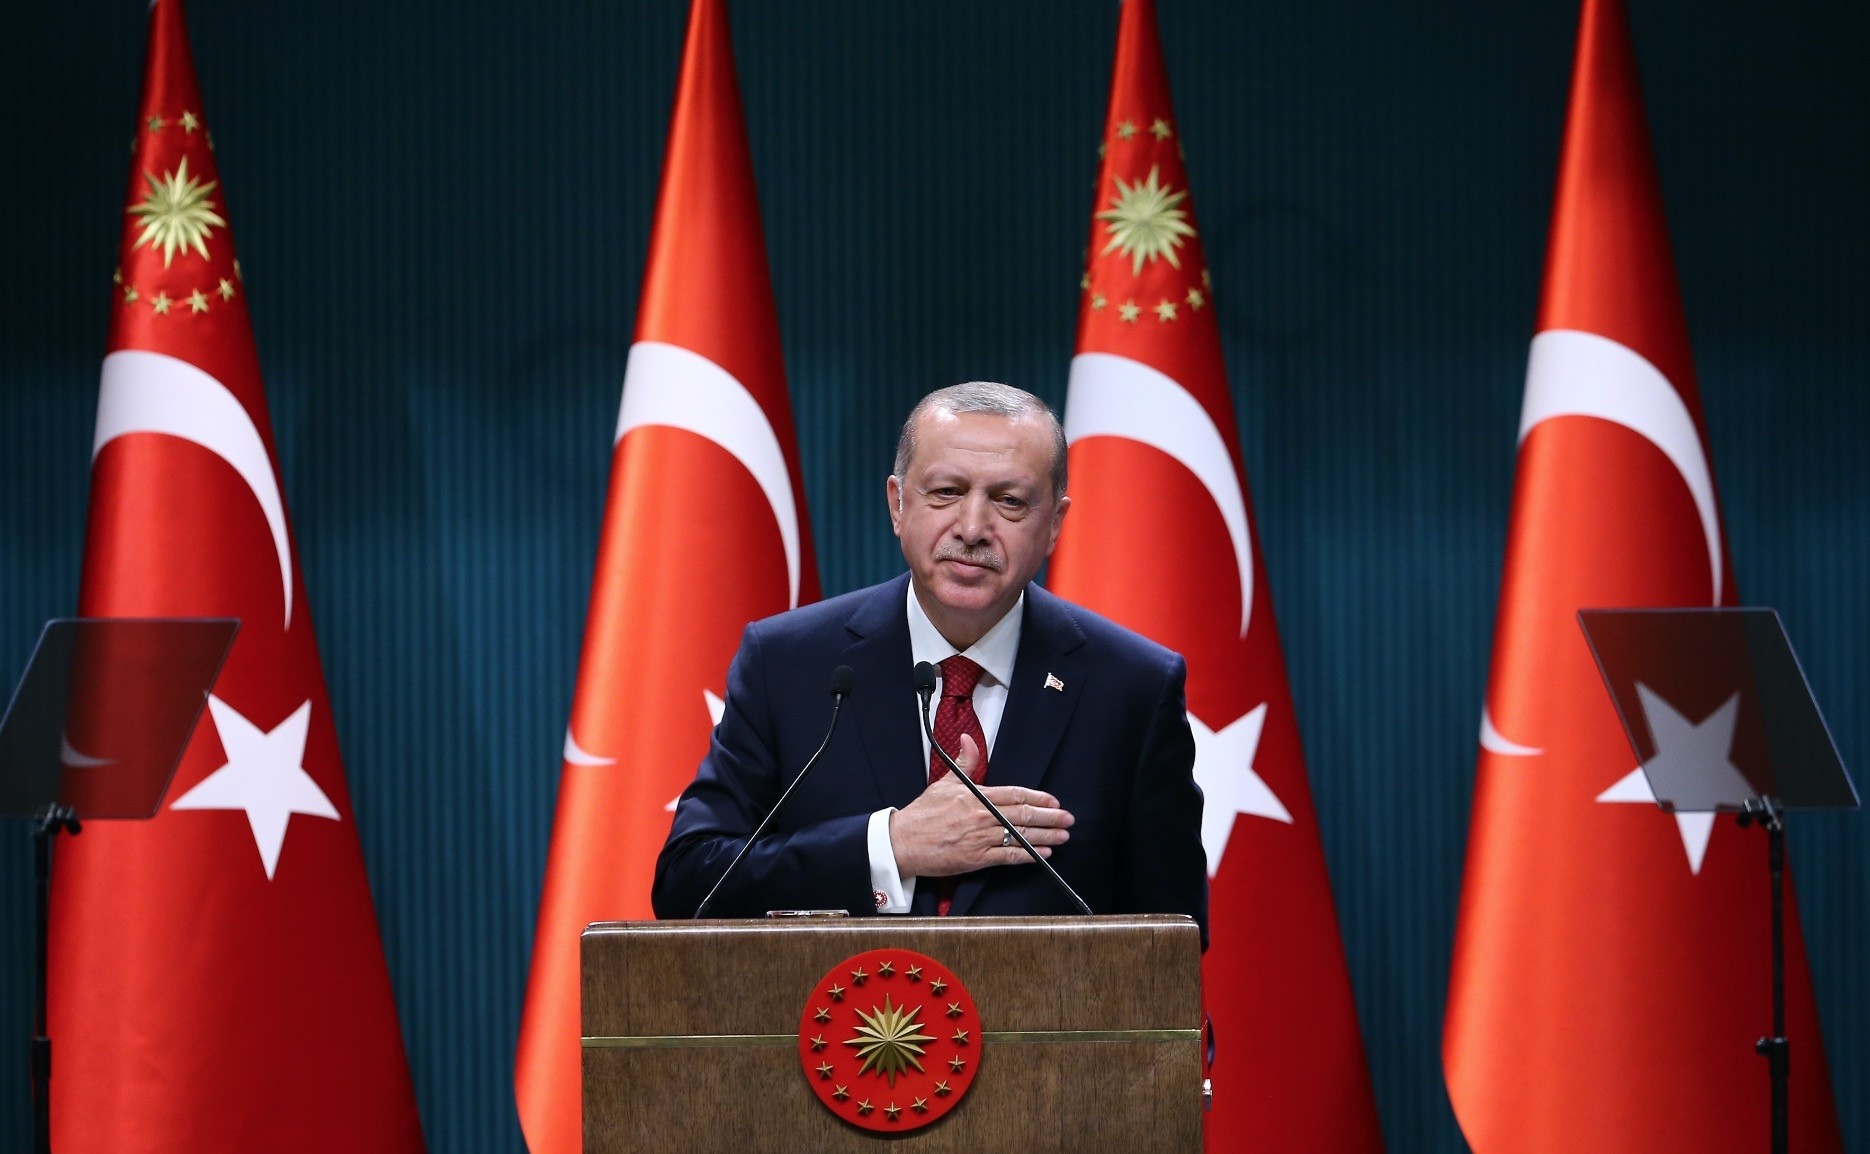 Presidential and general elections were scheduled to be held on Nov. 2019, but the government has decided to change a date following the recommendation from MHP Chairman Bahceli.